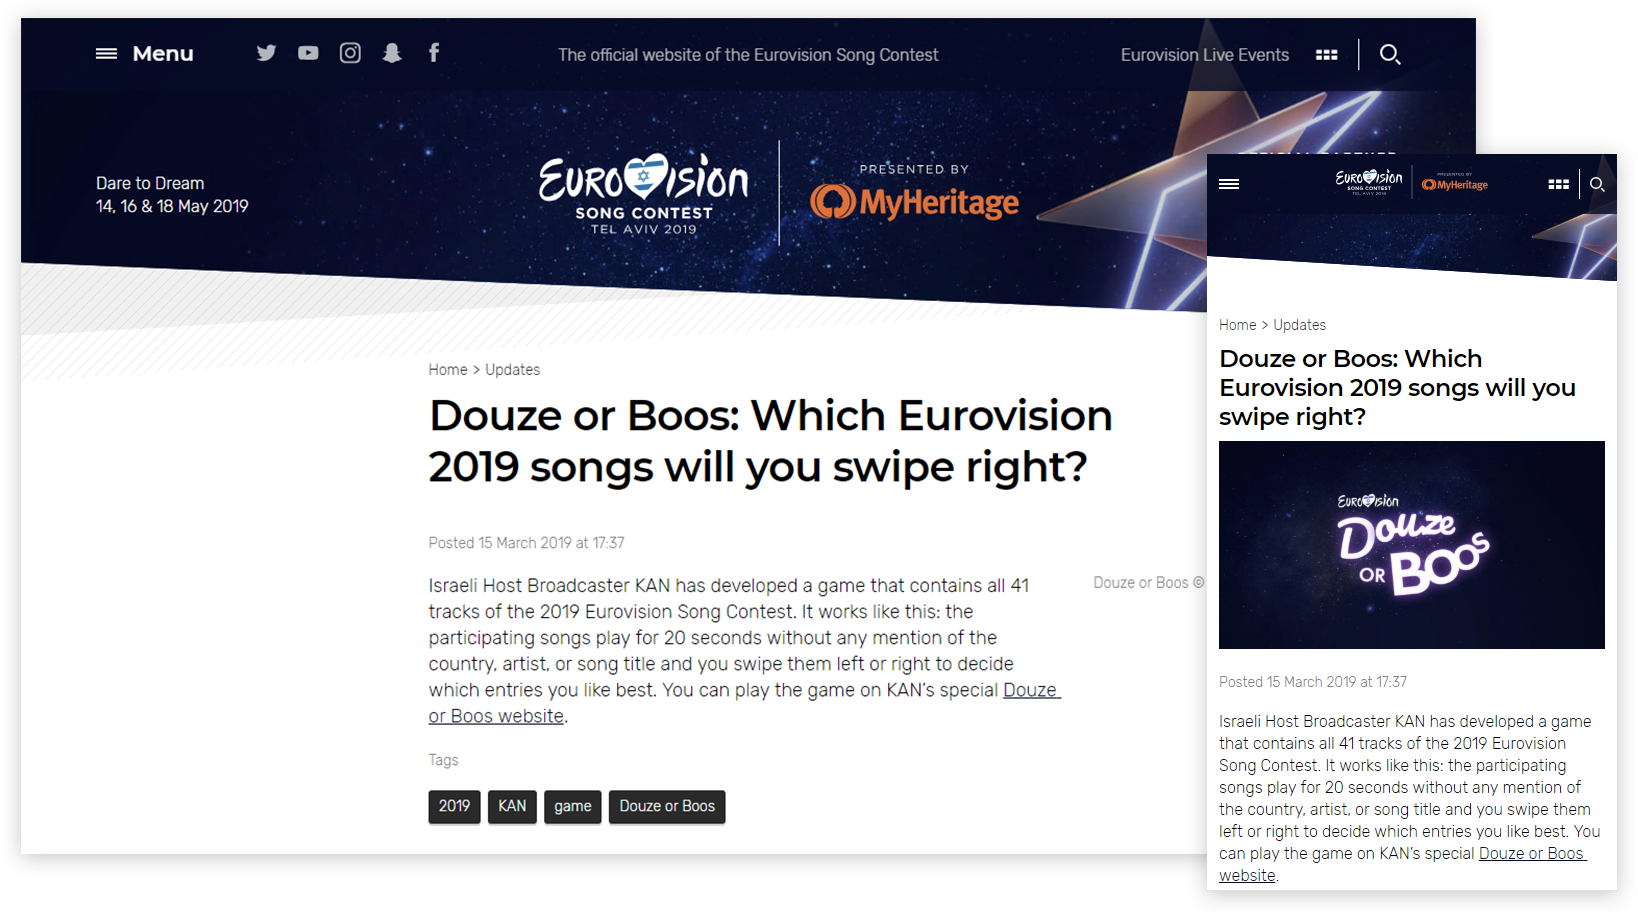 Douze or Boos on Eurovision official site